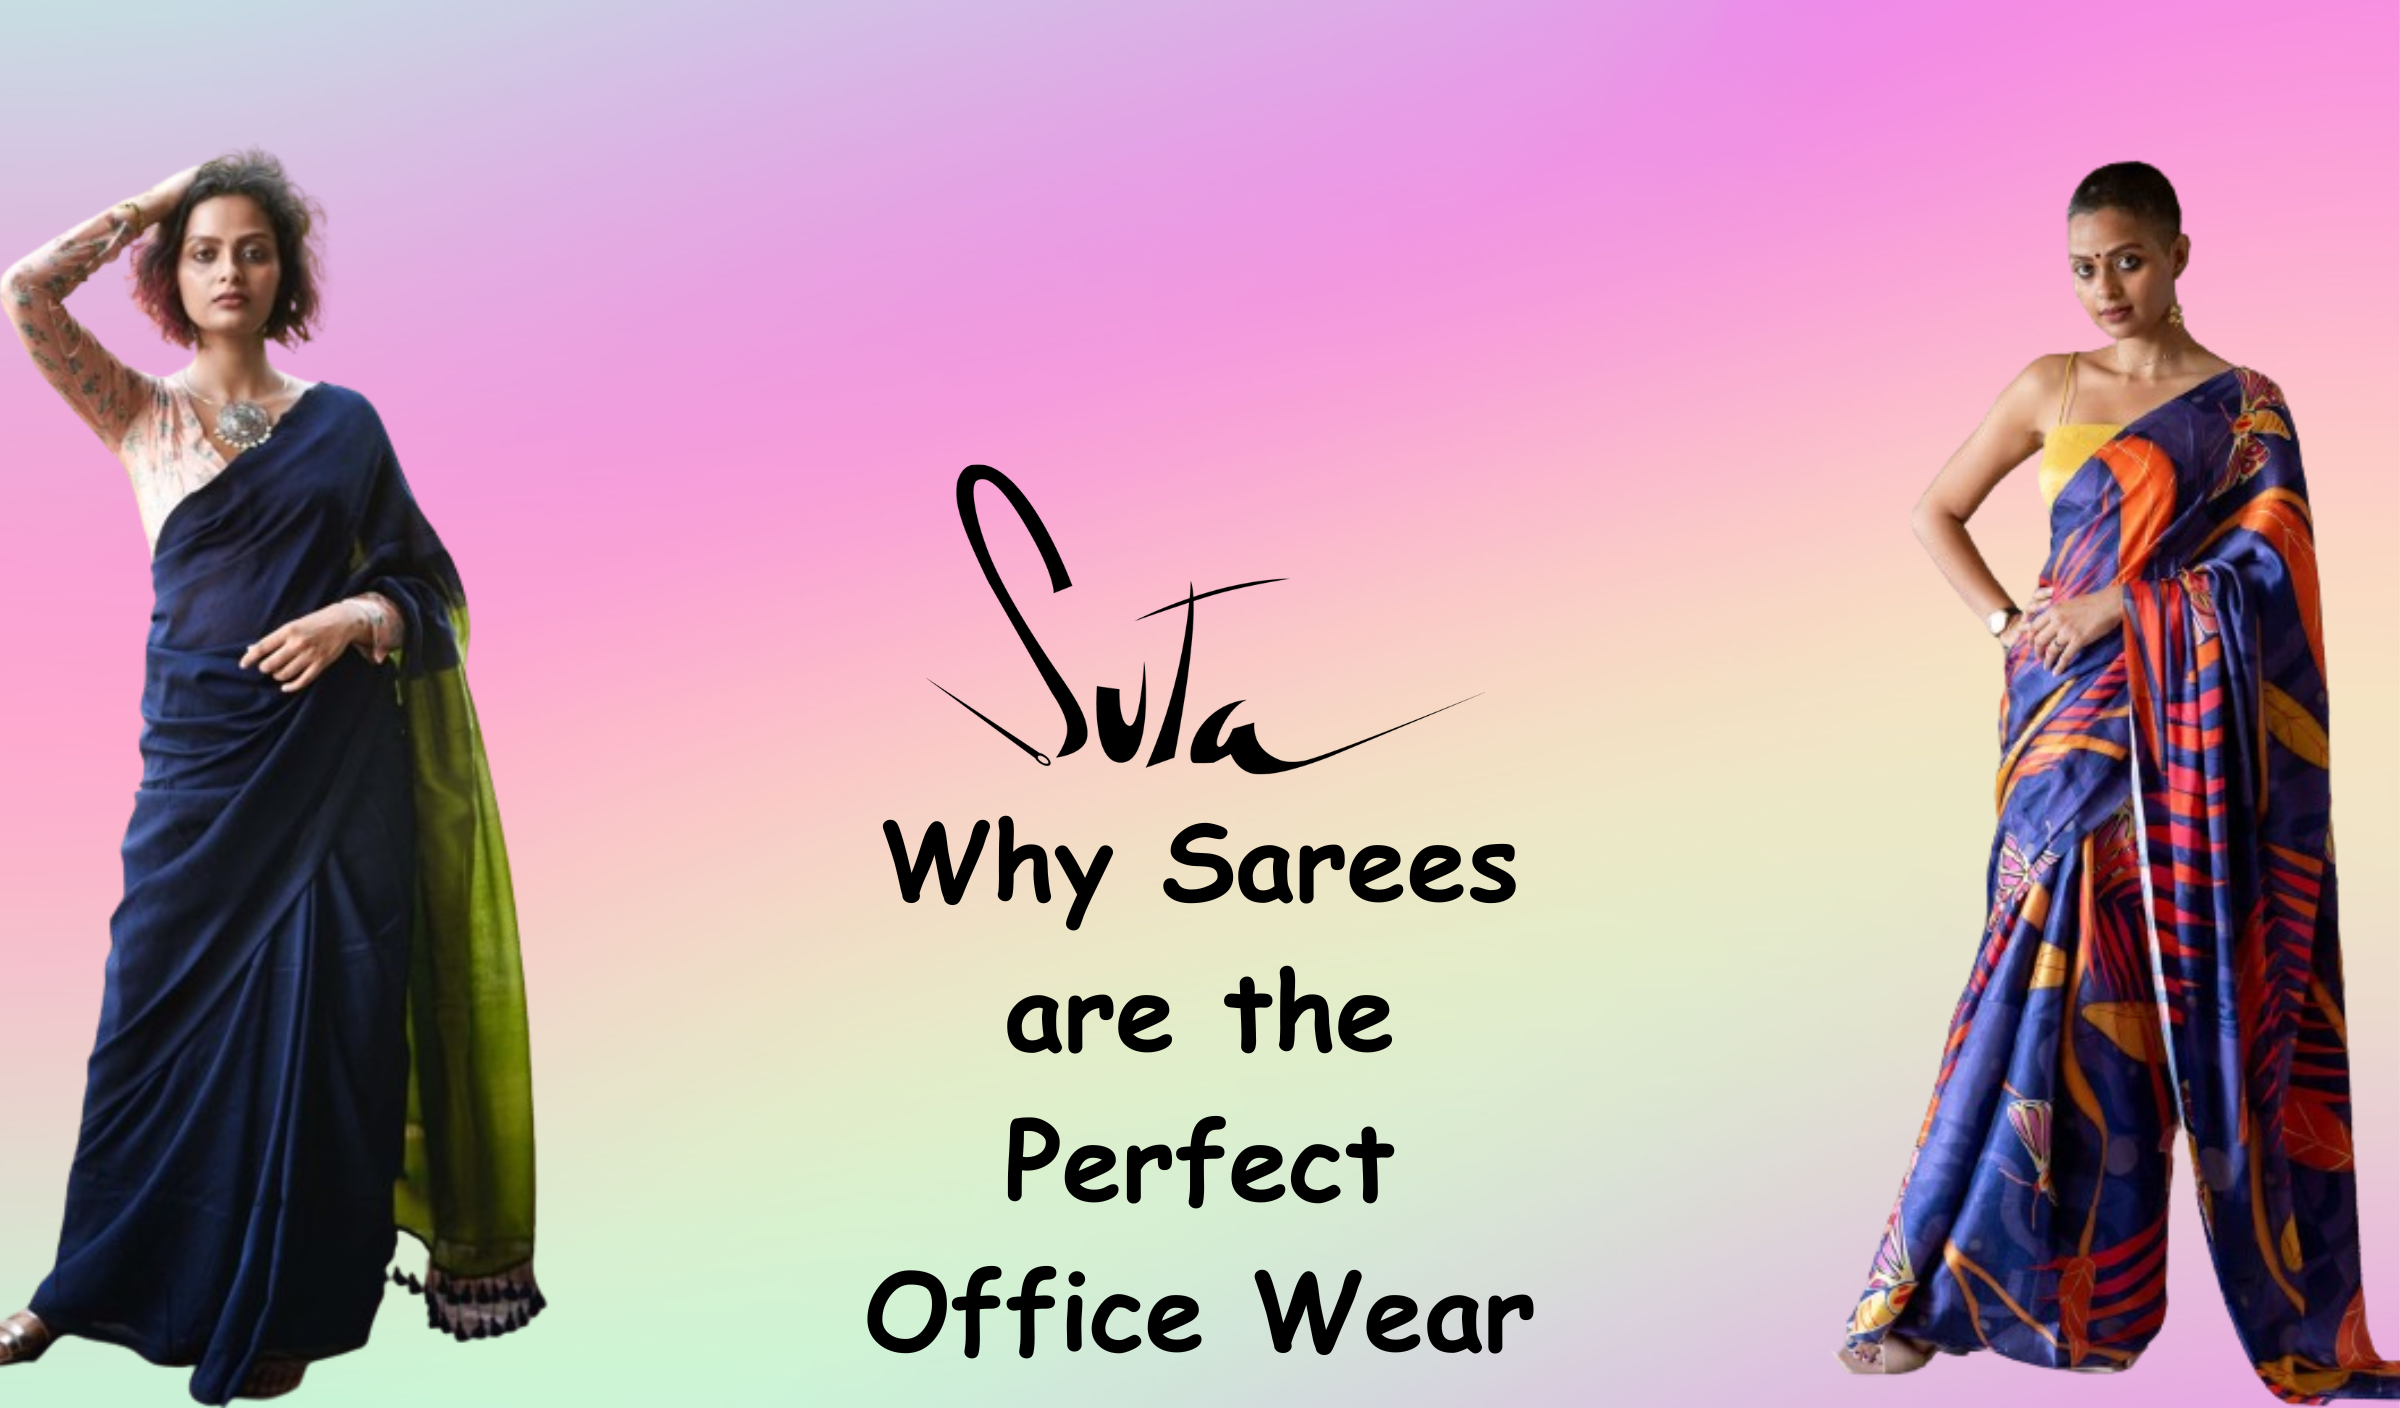 Why Sarees are the Perfect Office Wear